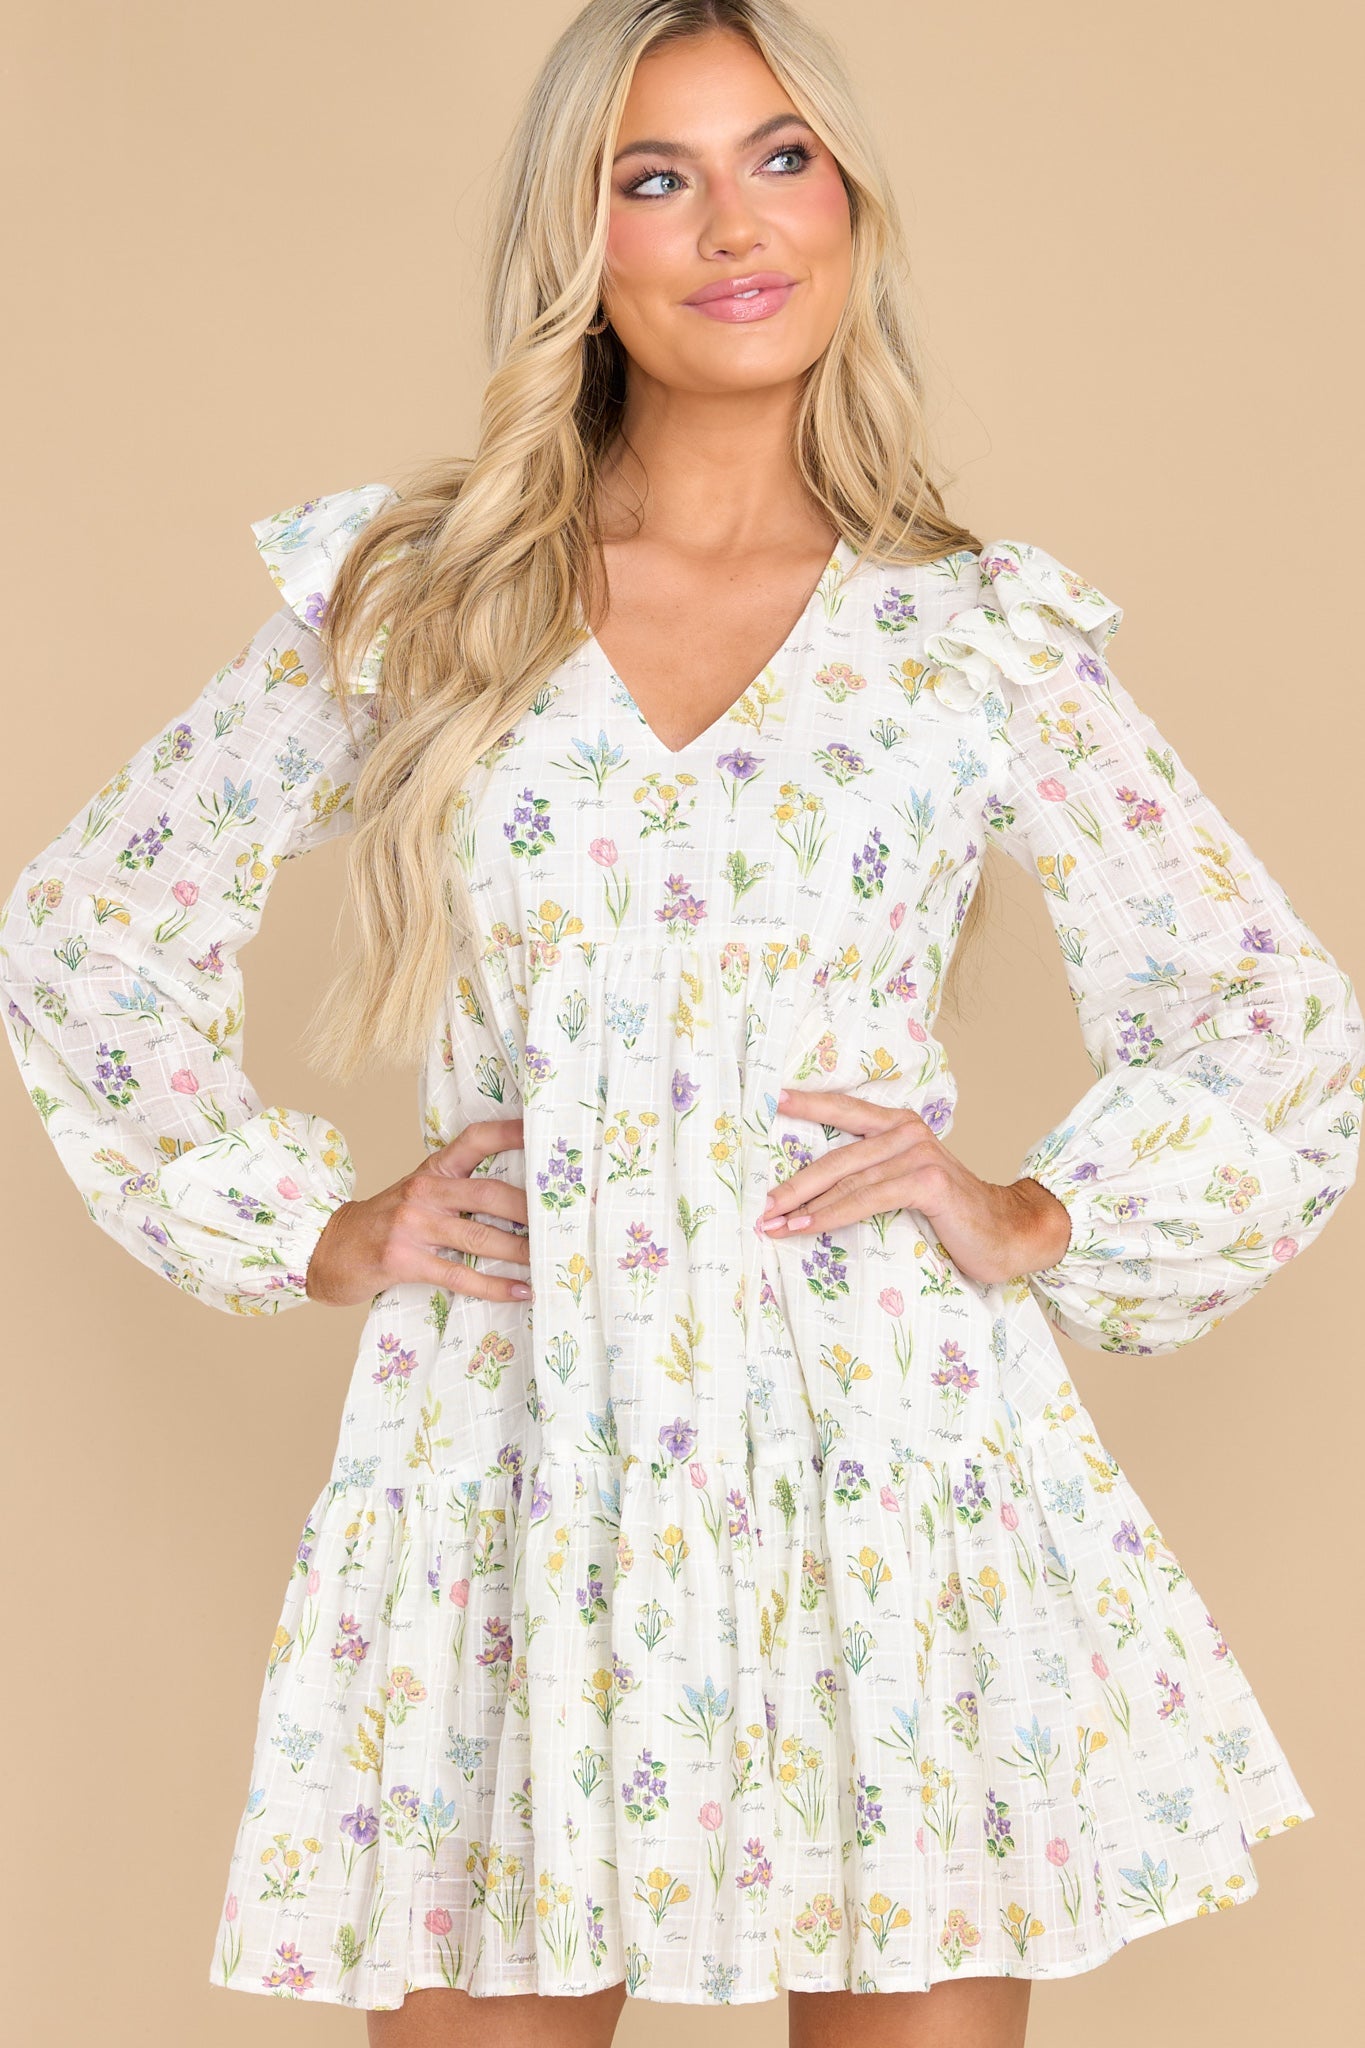 Front view of this dress that showcases the floral pattern of the ivory fabric.